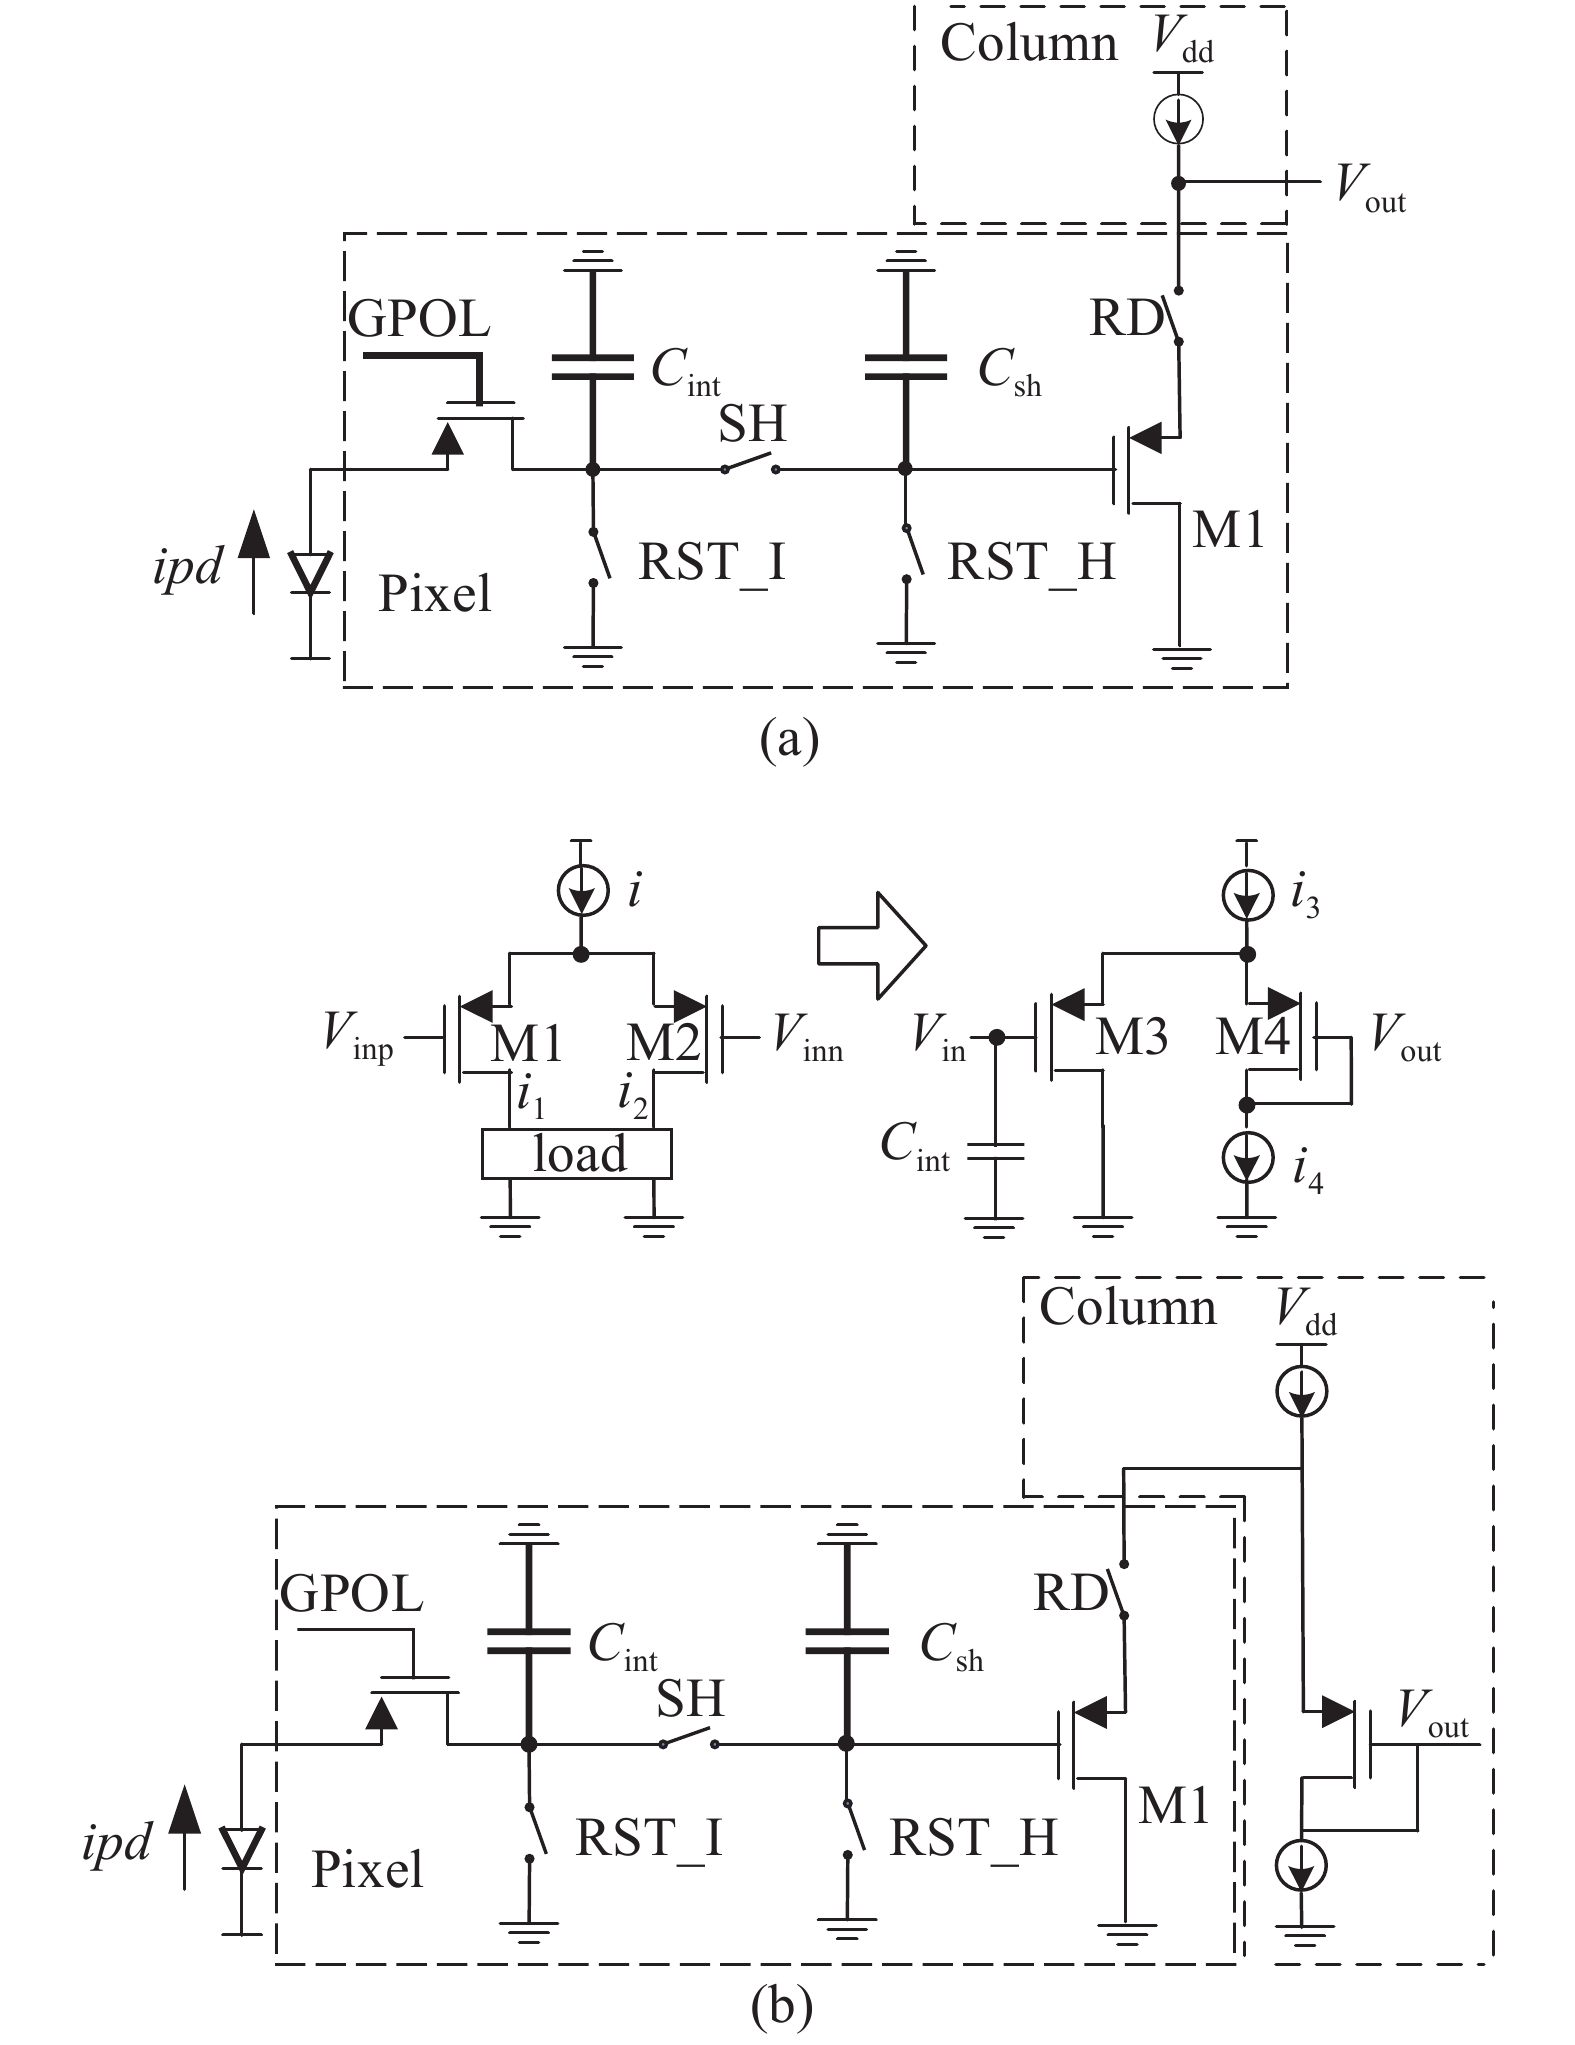 (a) Conventional readout unit circuit diagram, (b) readout unit circuit with the proposed buffer